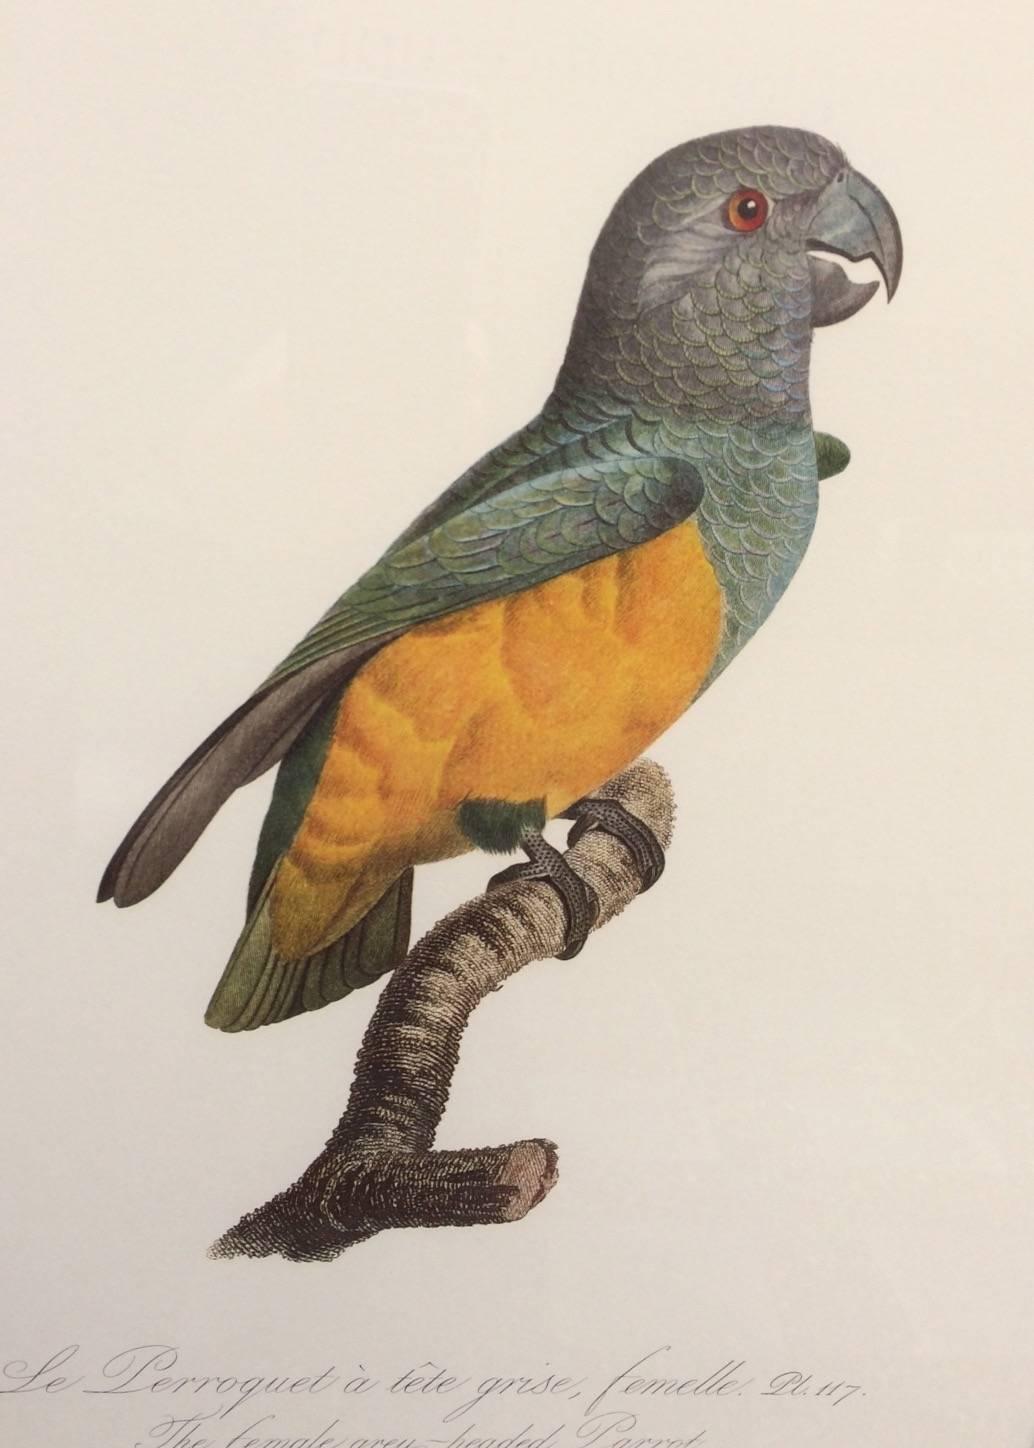 French Provincial Colored Lithograph of Parrots from 'Historie Naturelles des Perroquets'